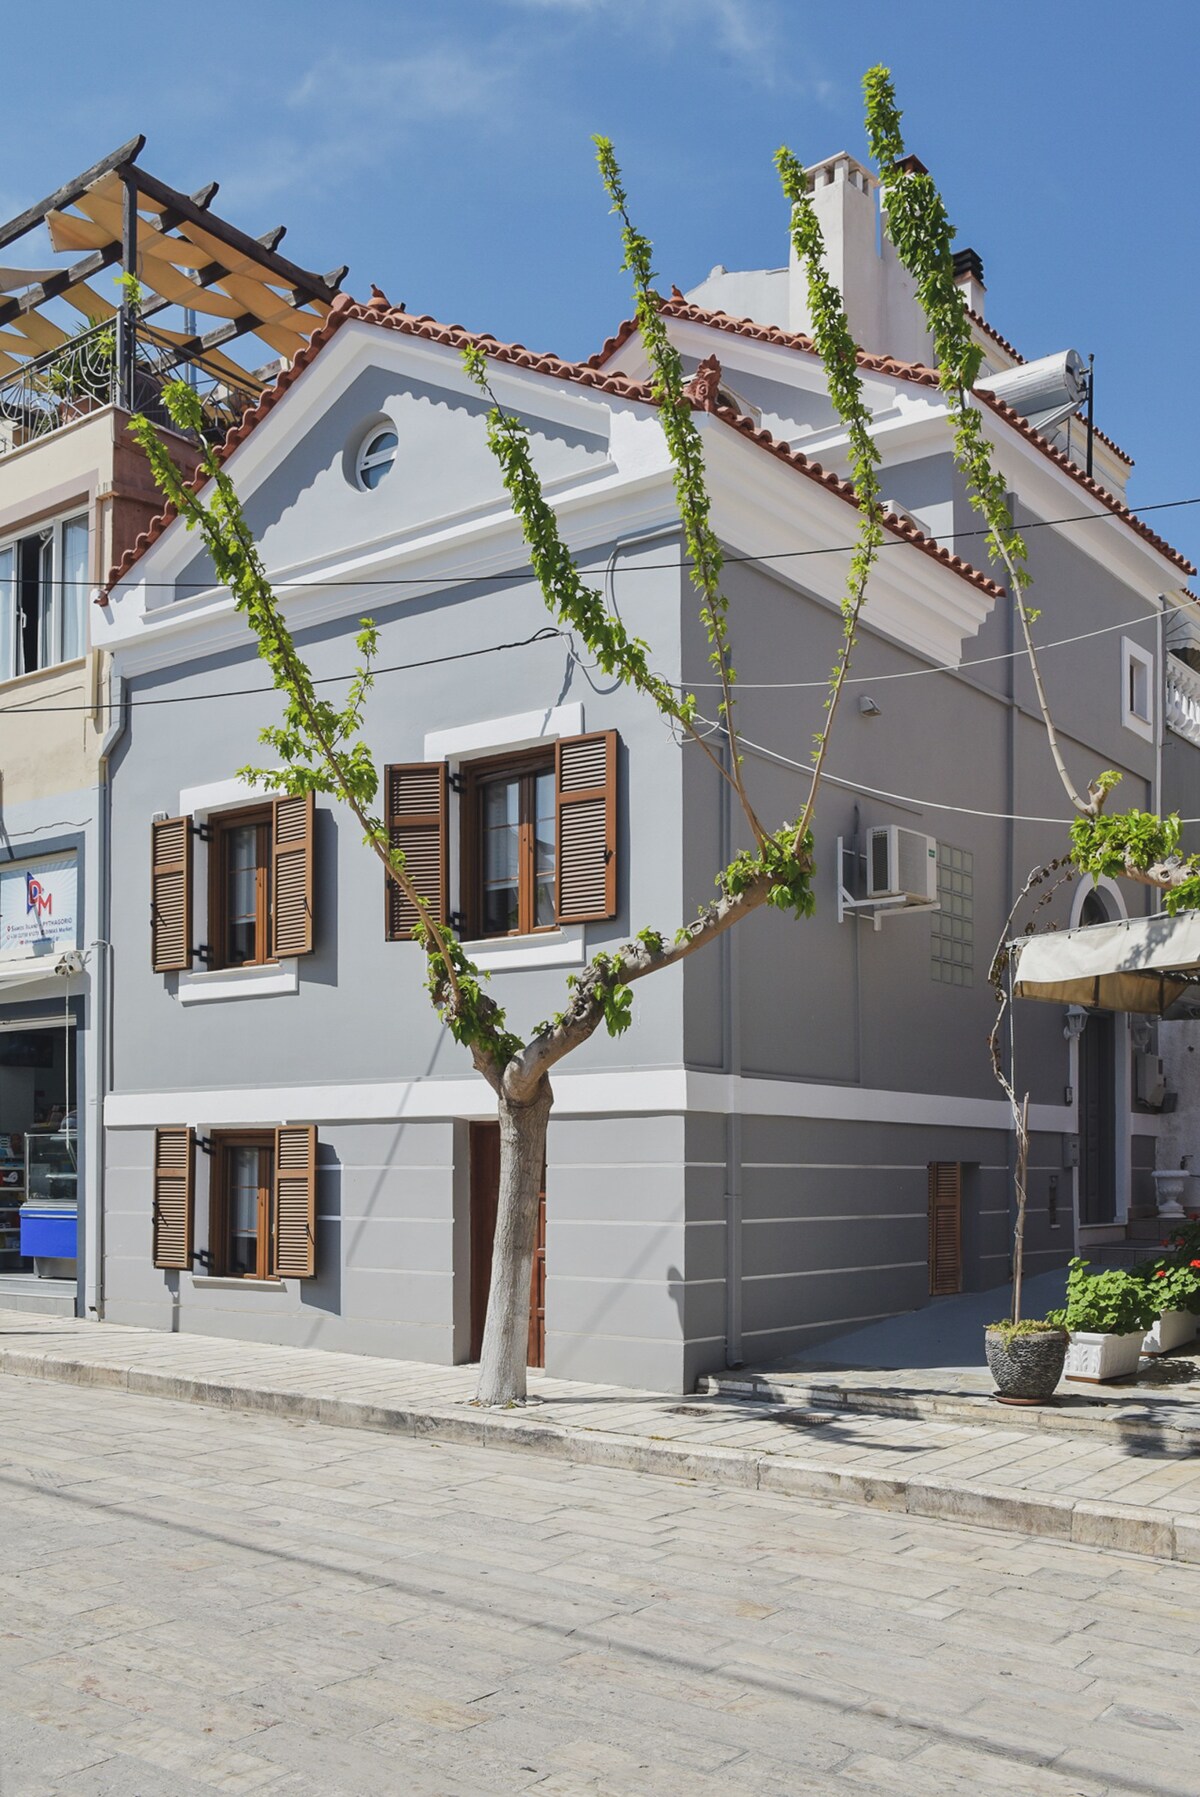 Irinii's Boutique home in the heart of Pythagorion